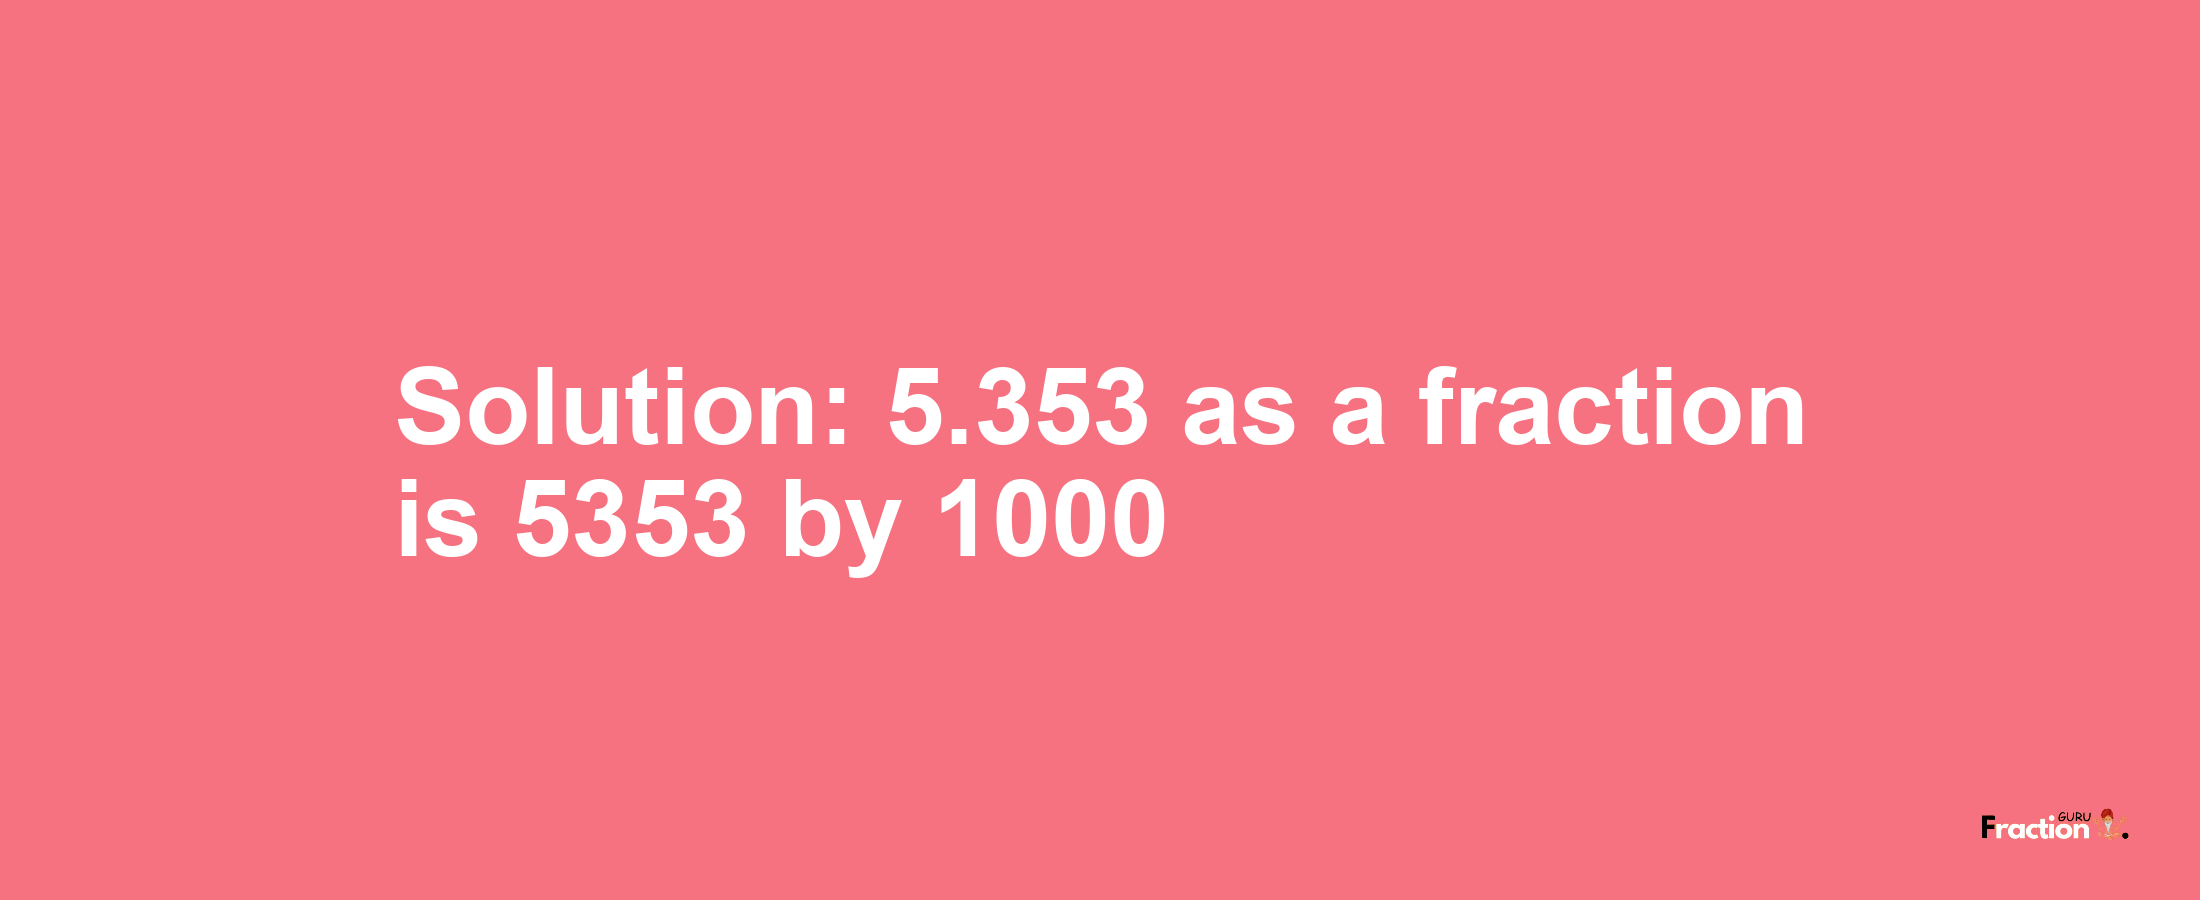 Solution:5.353 as a fraction is 5353/1000